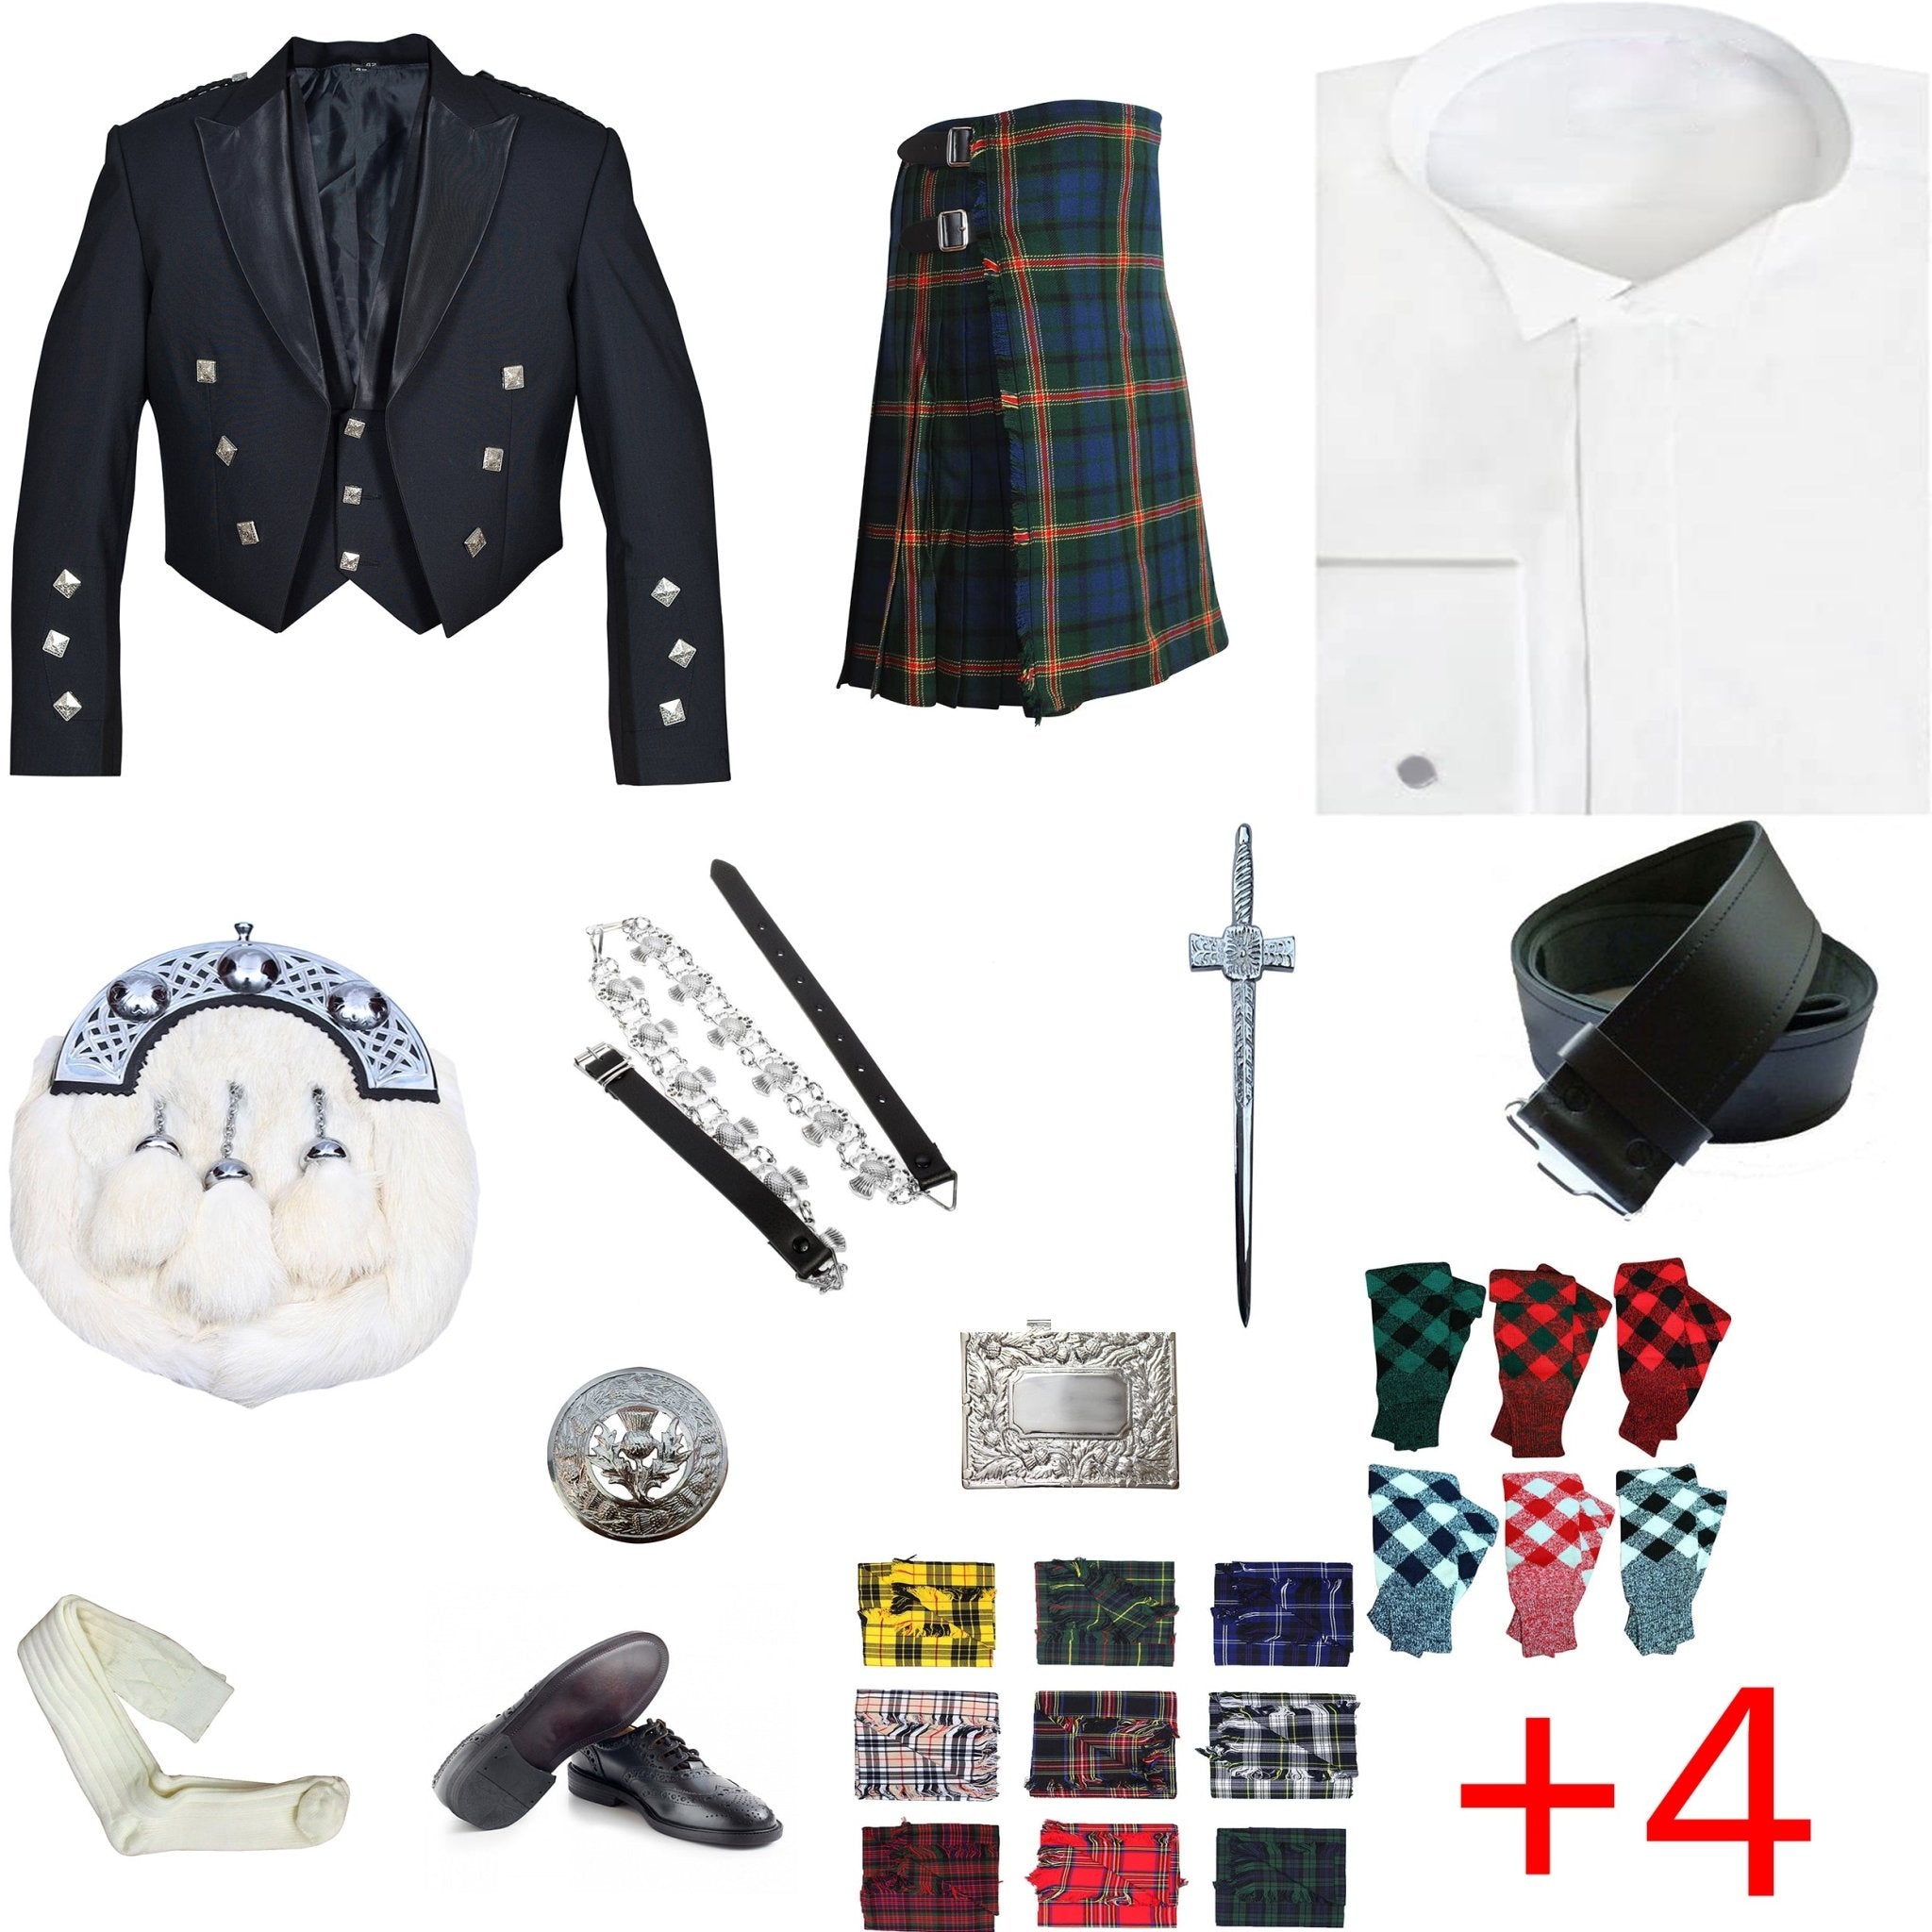 Classic Prince Charlie Kilt Outfit Package 9 PCS Sets - Imperial Highland Supplies